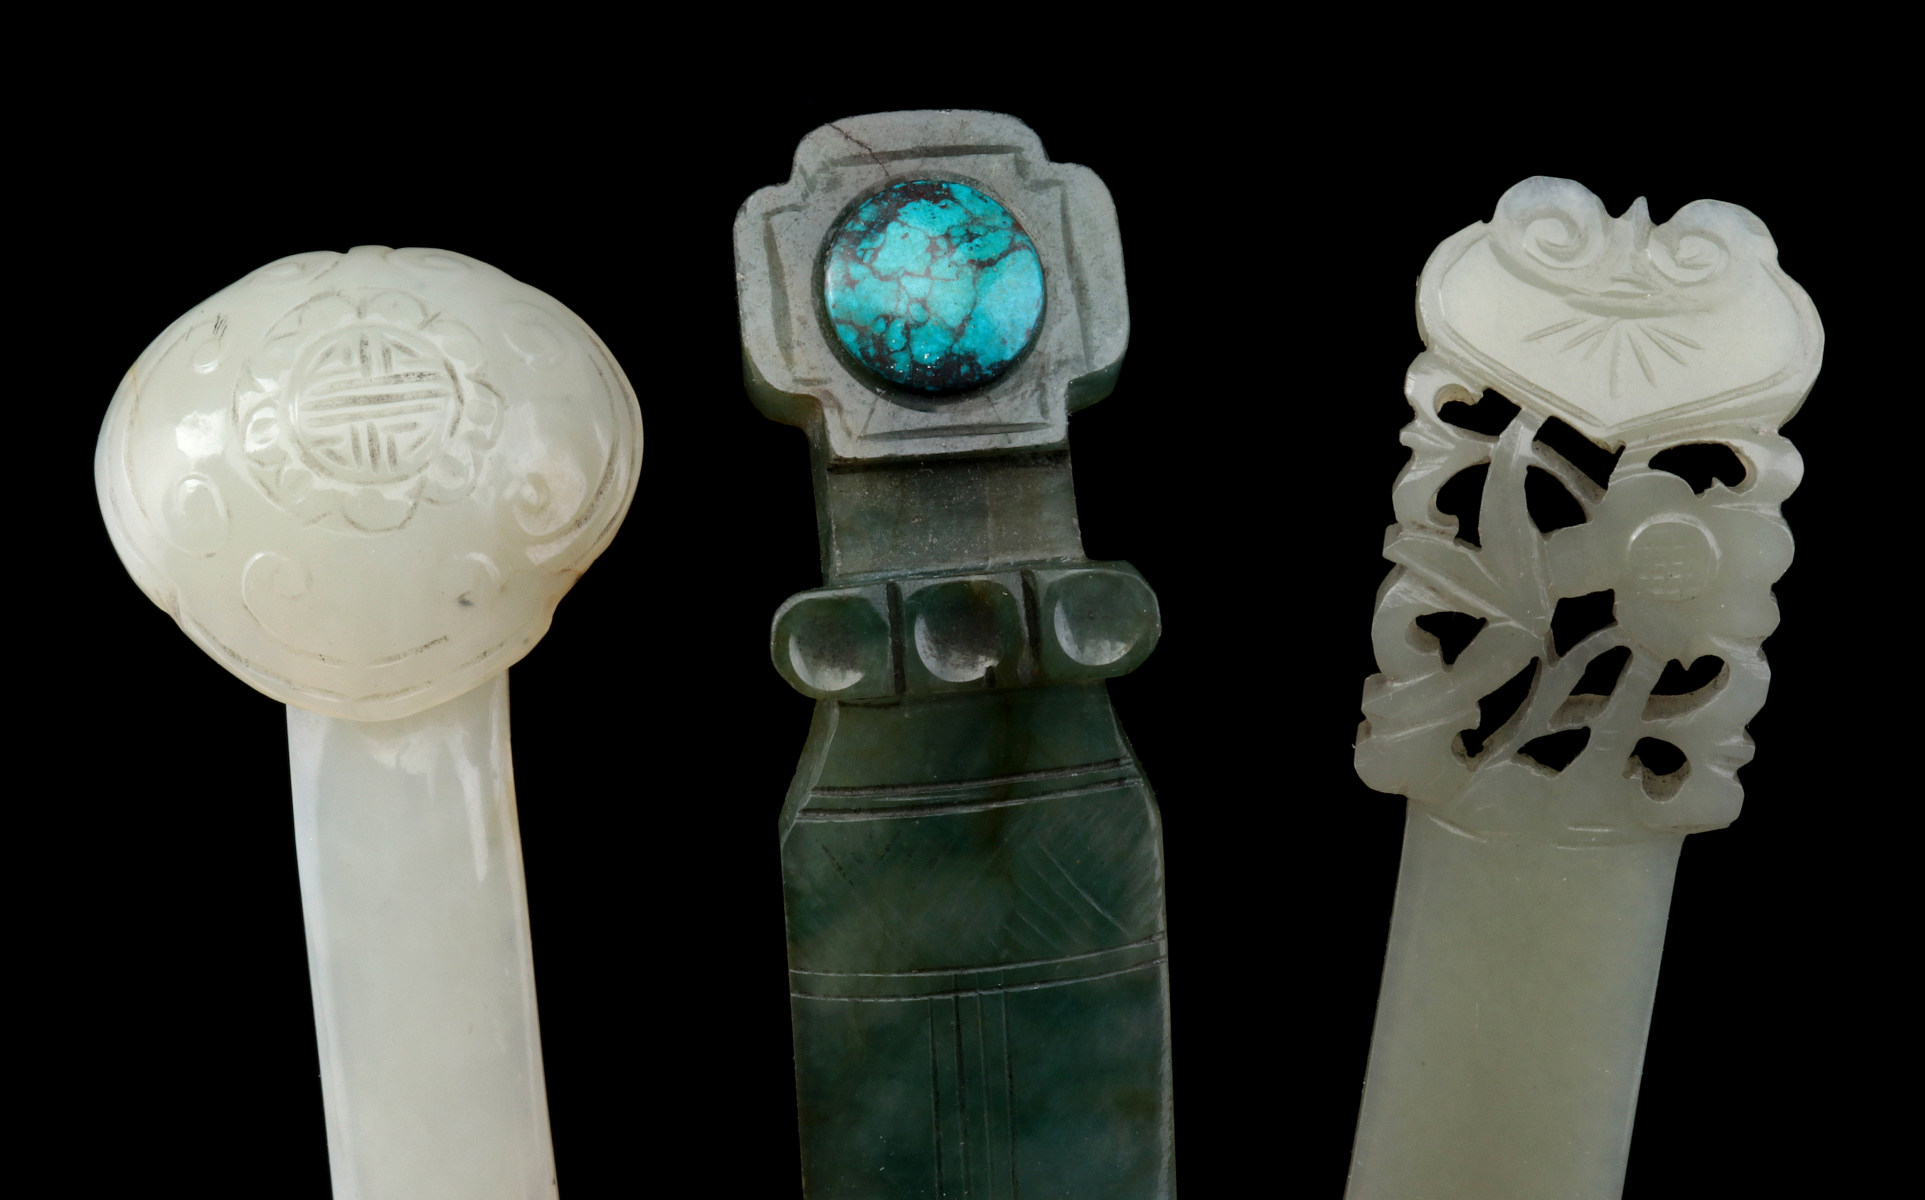 A MINIATURE CARVED JADE SCEPTRE WITH TWO SIMILAR OBJECTS